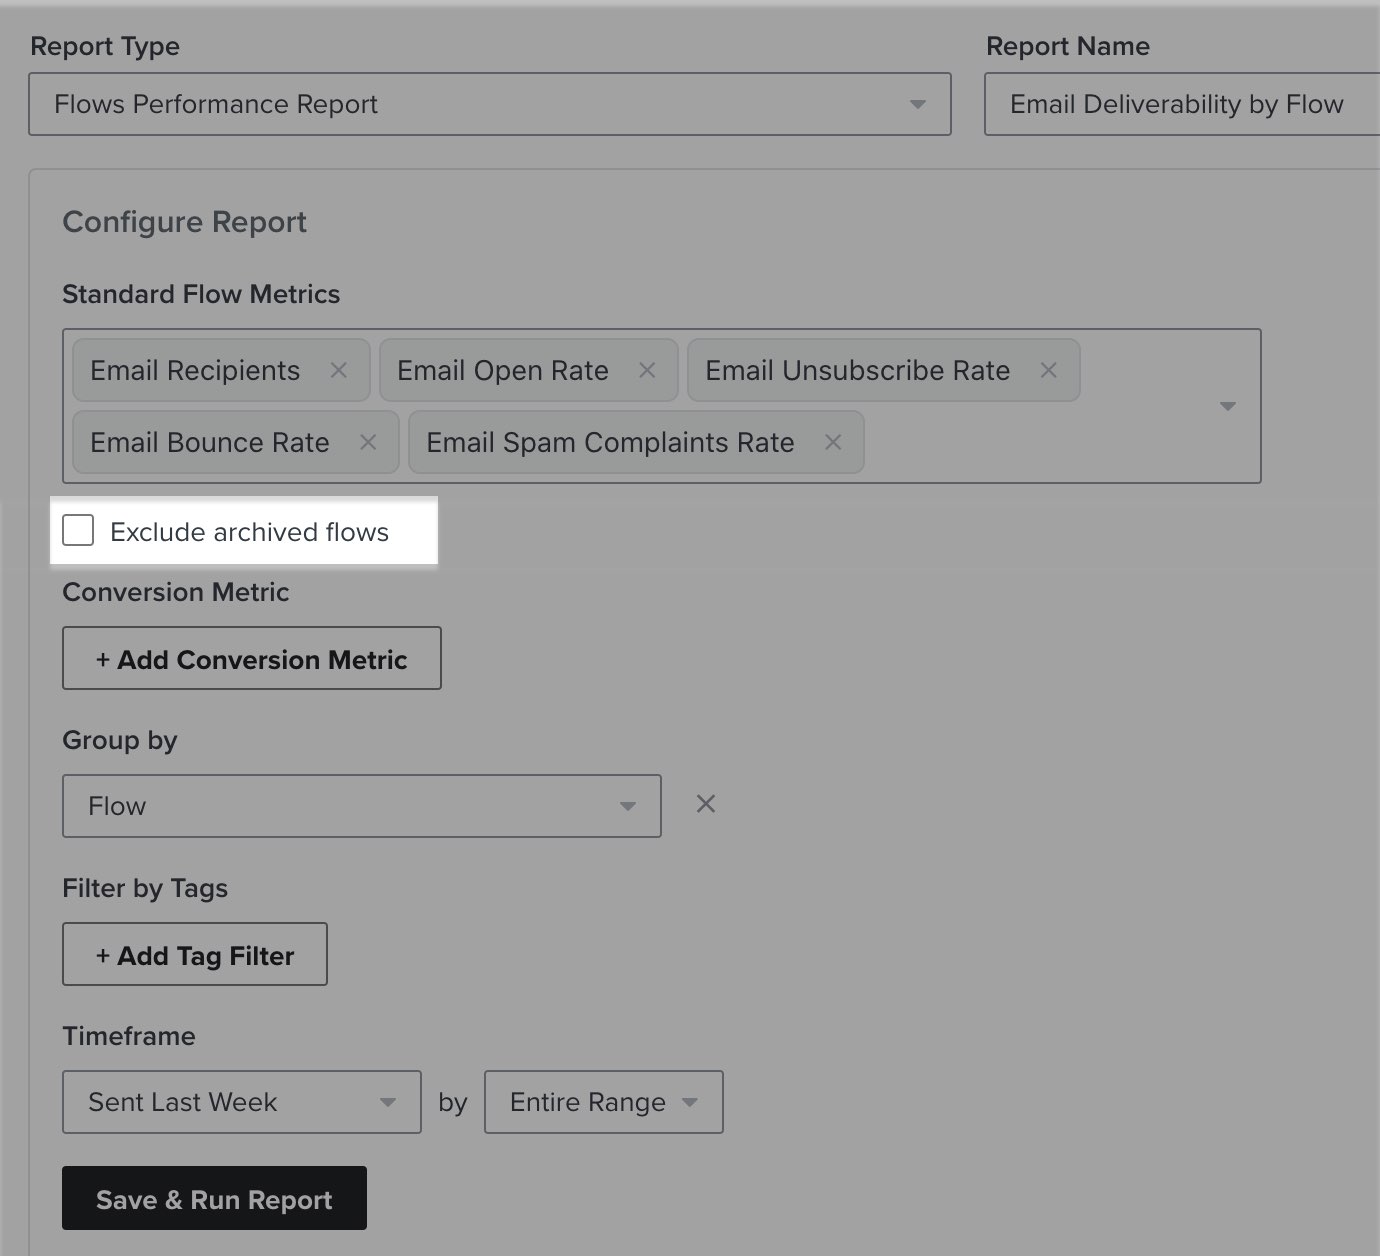 Custom report configuration with the setting 'exclude archived flows' unchecked.